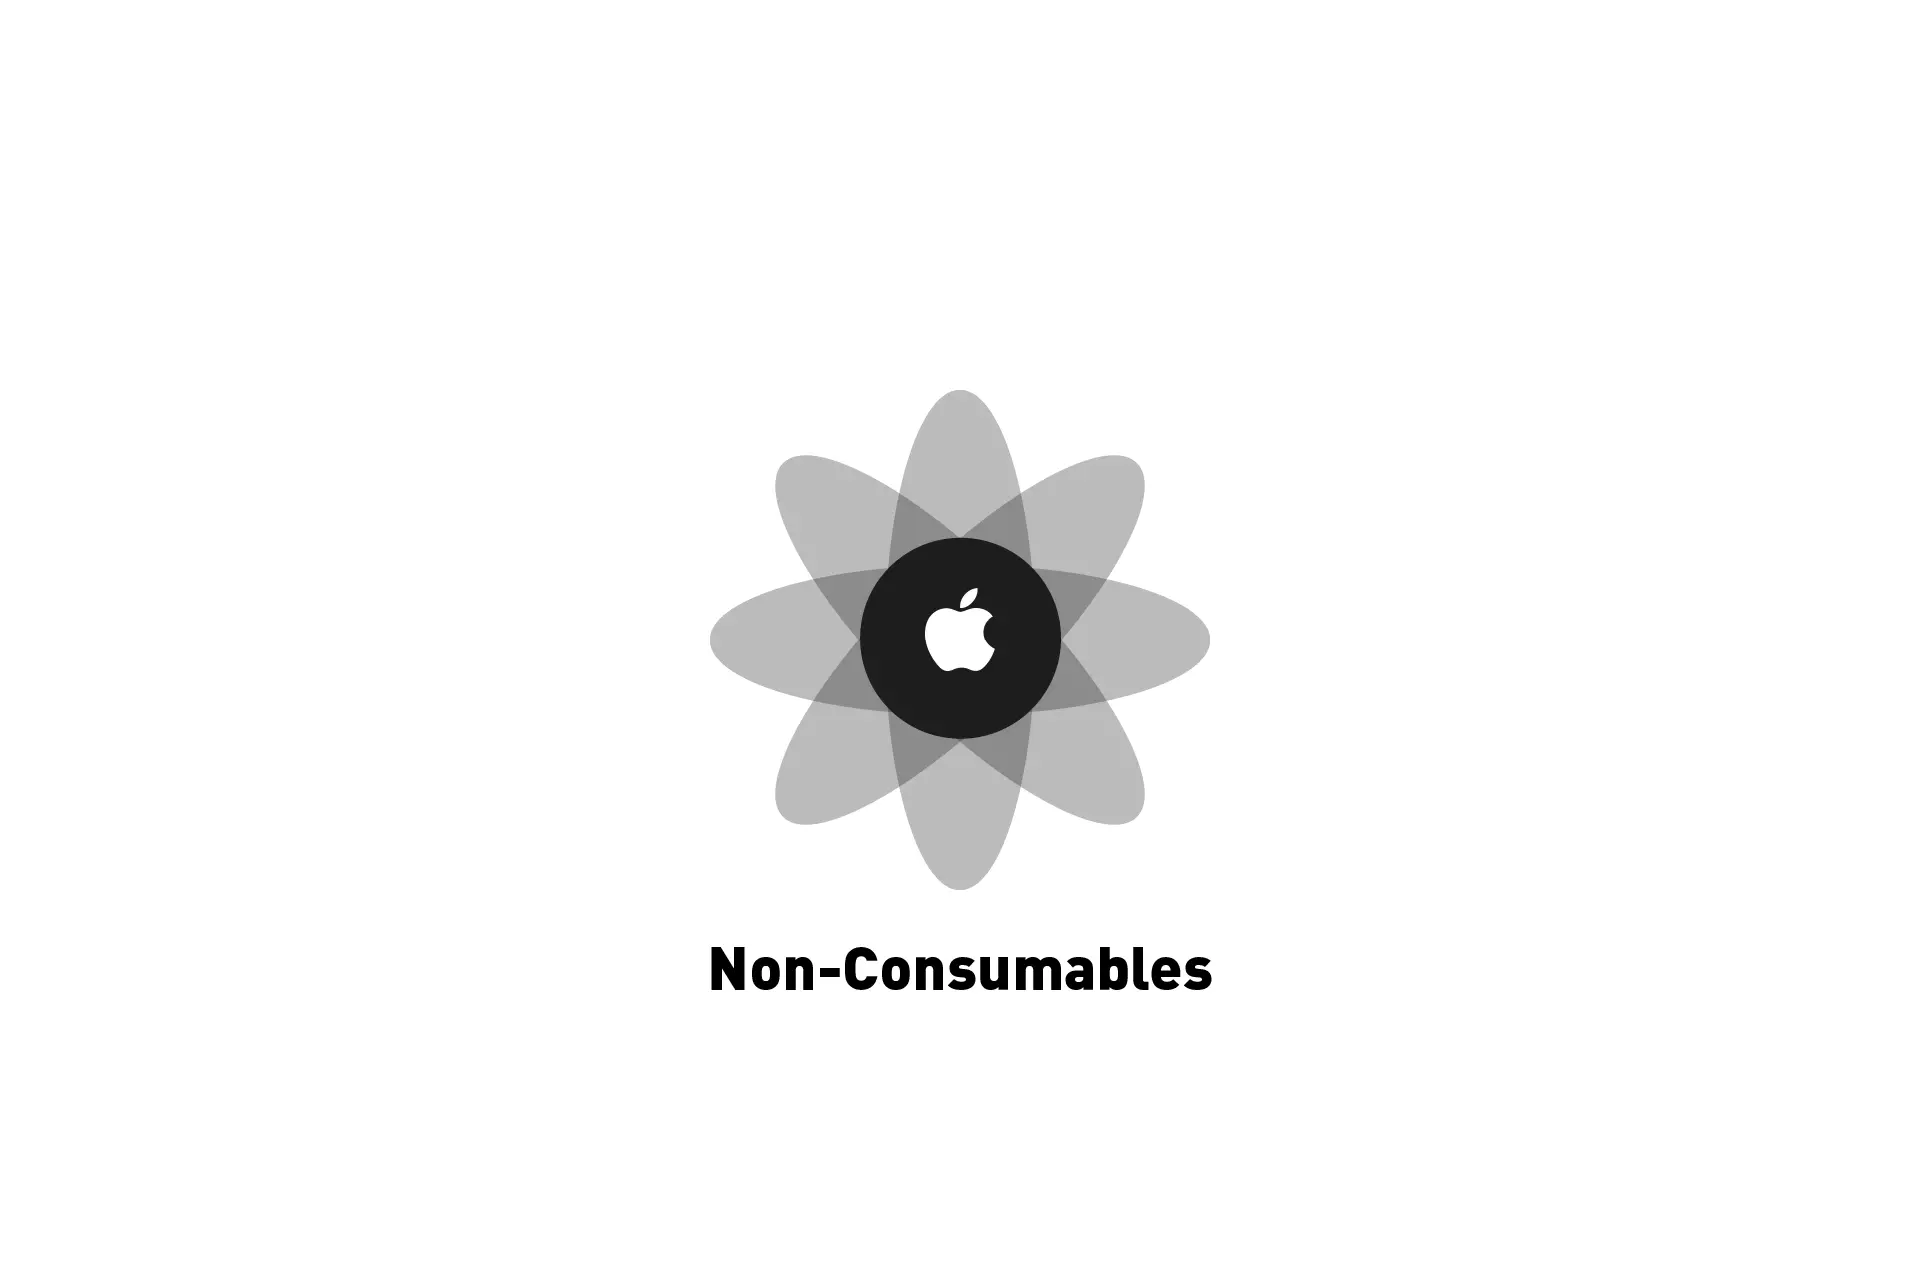 A flower that represents Apple with the text "Non-Consumables" beneath it.